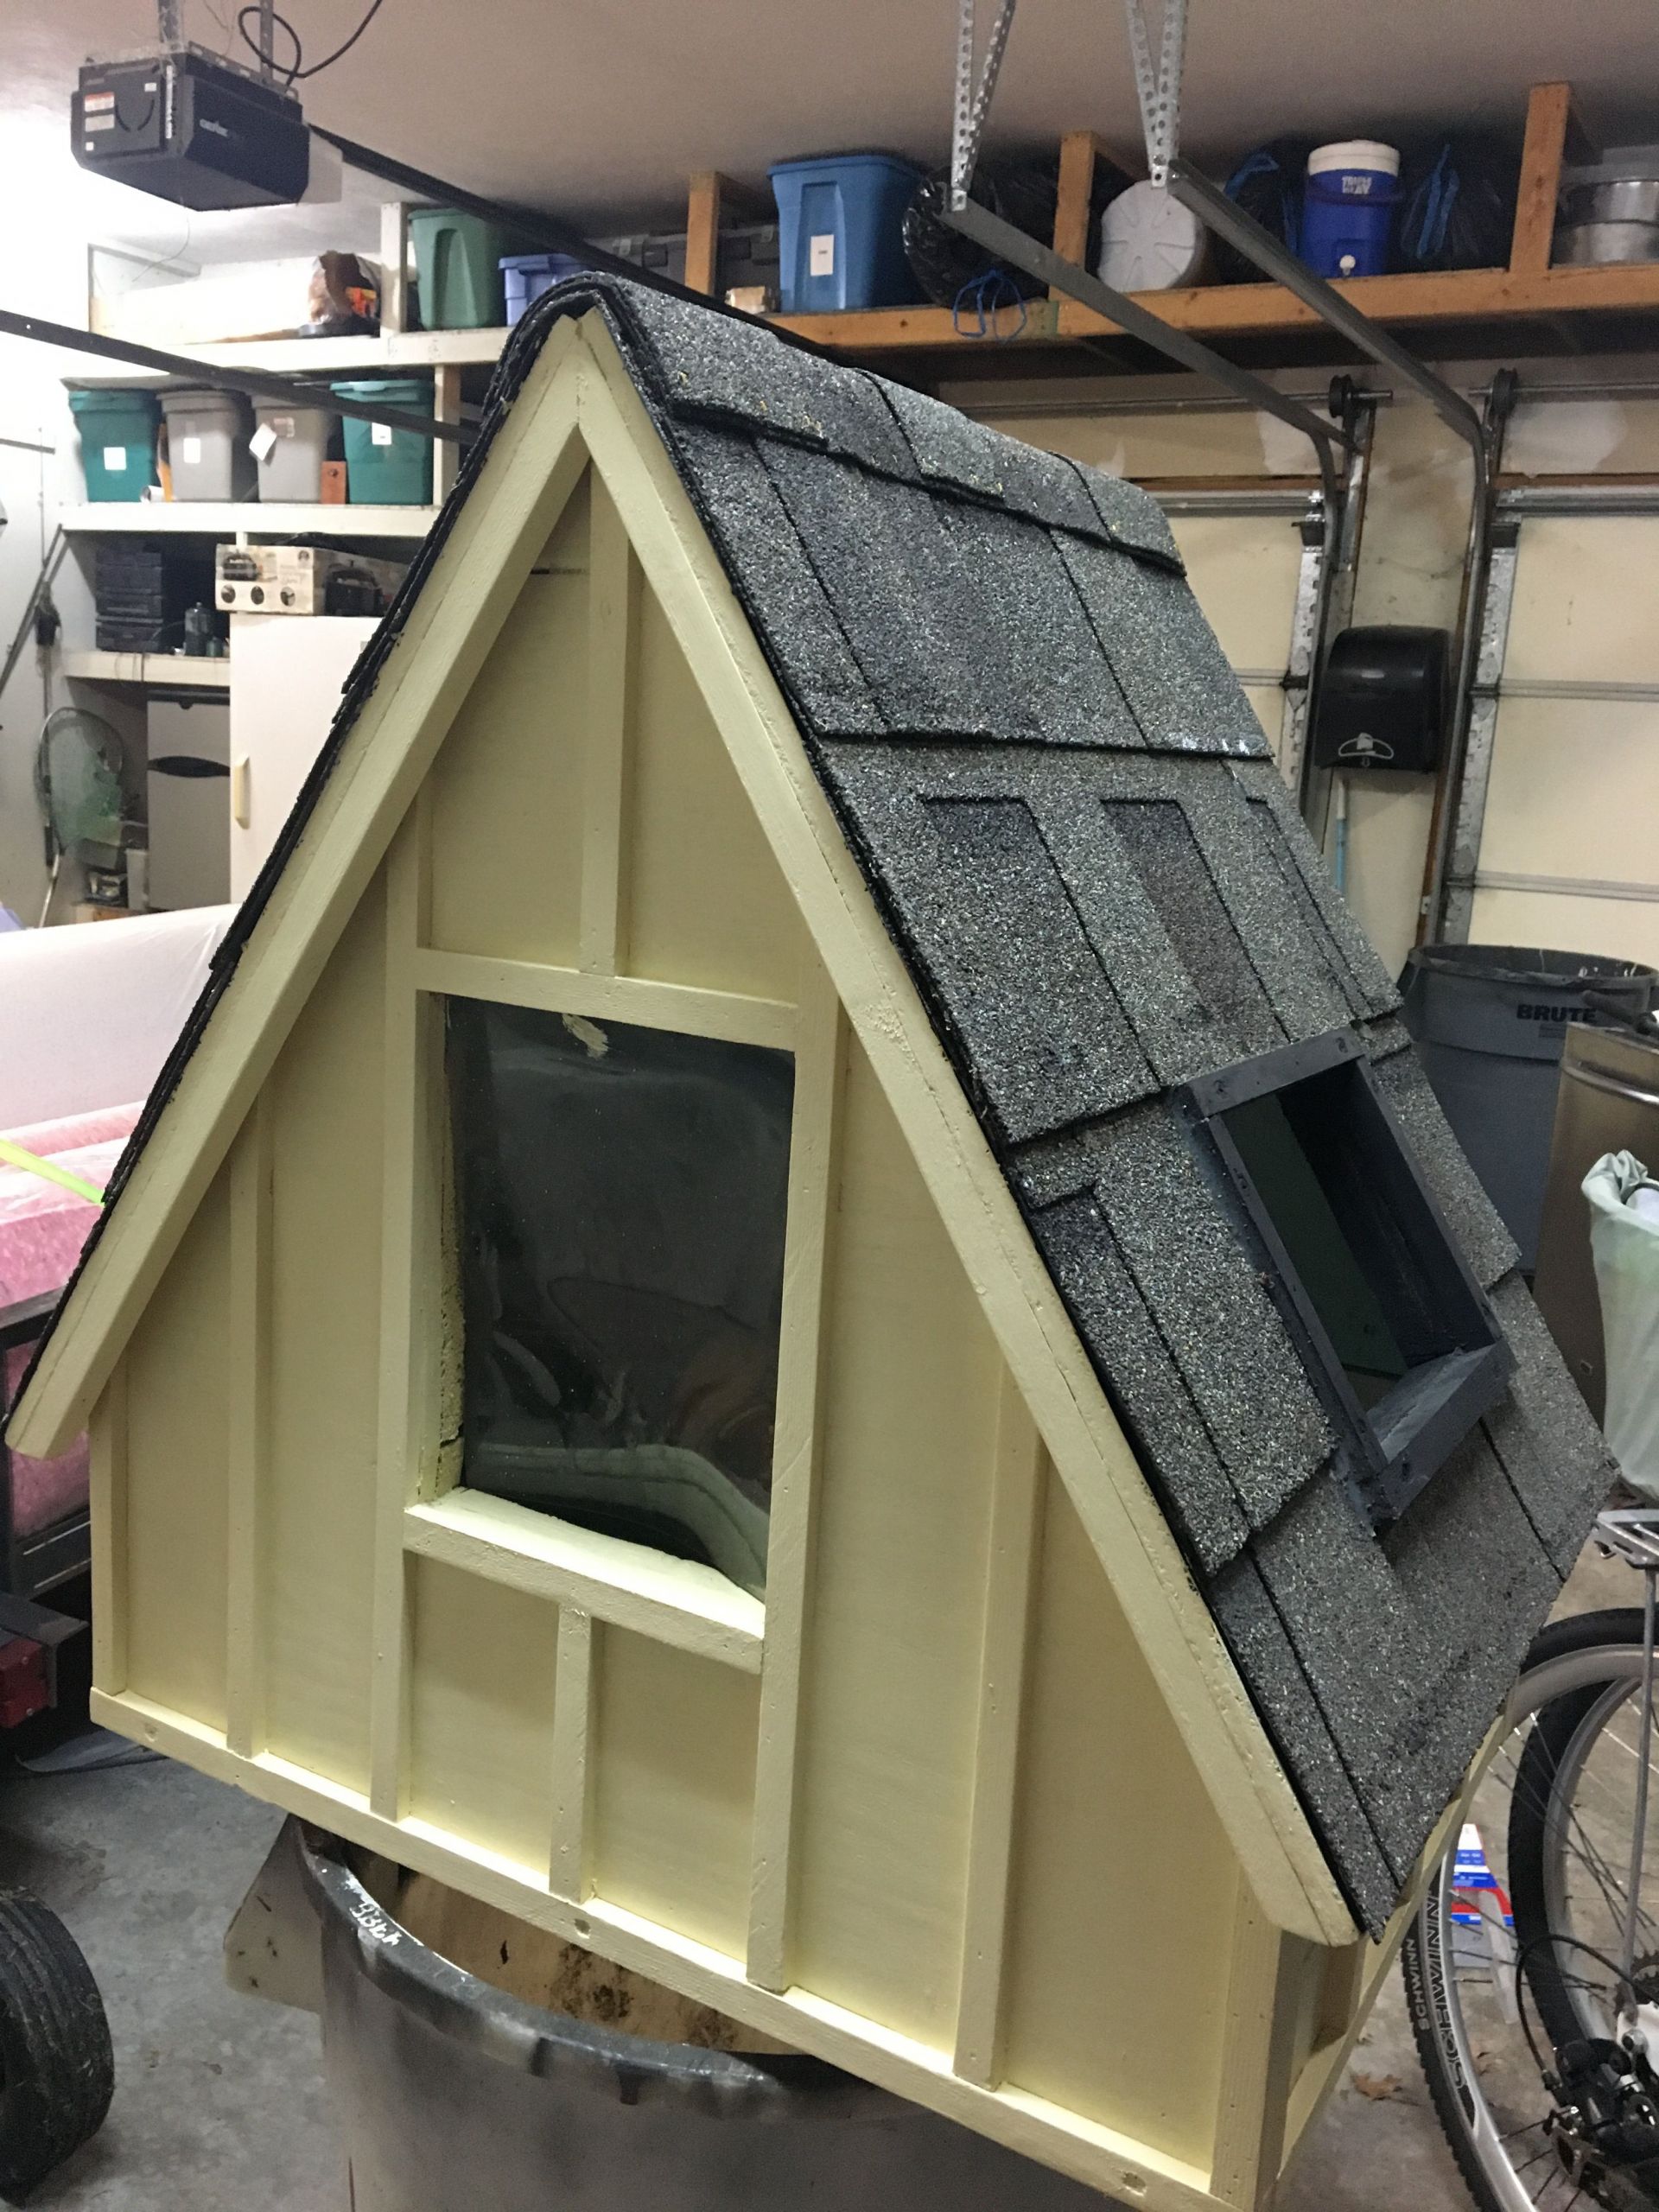 Insulated Outdoor Cat House DIY
 Outdoor Cat house Insulated for cold weather